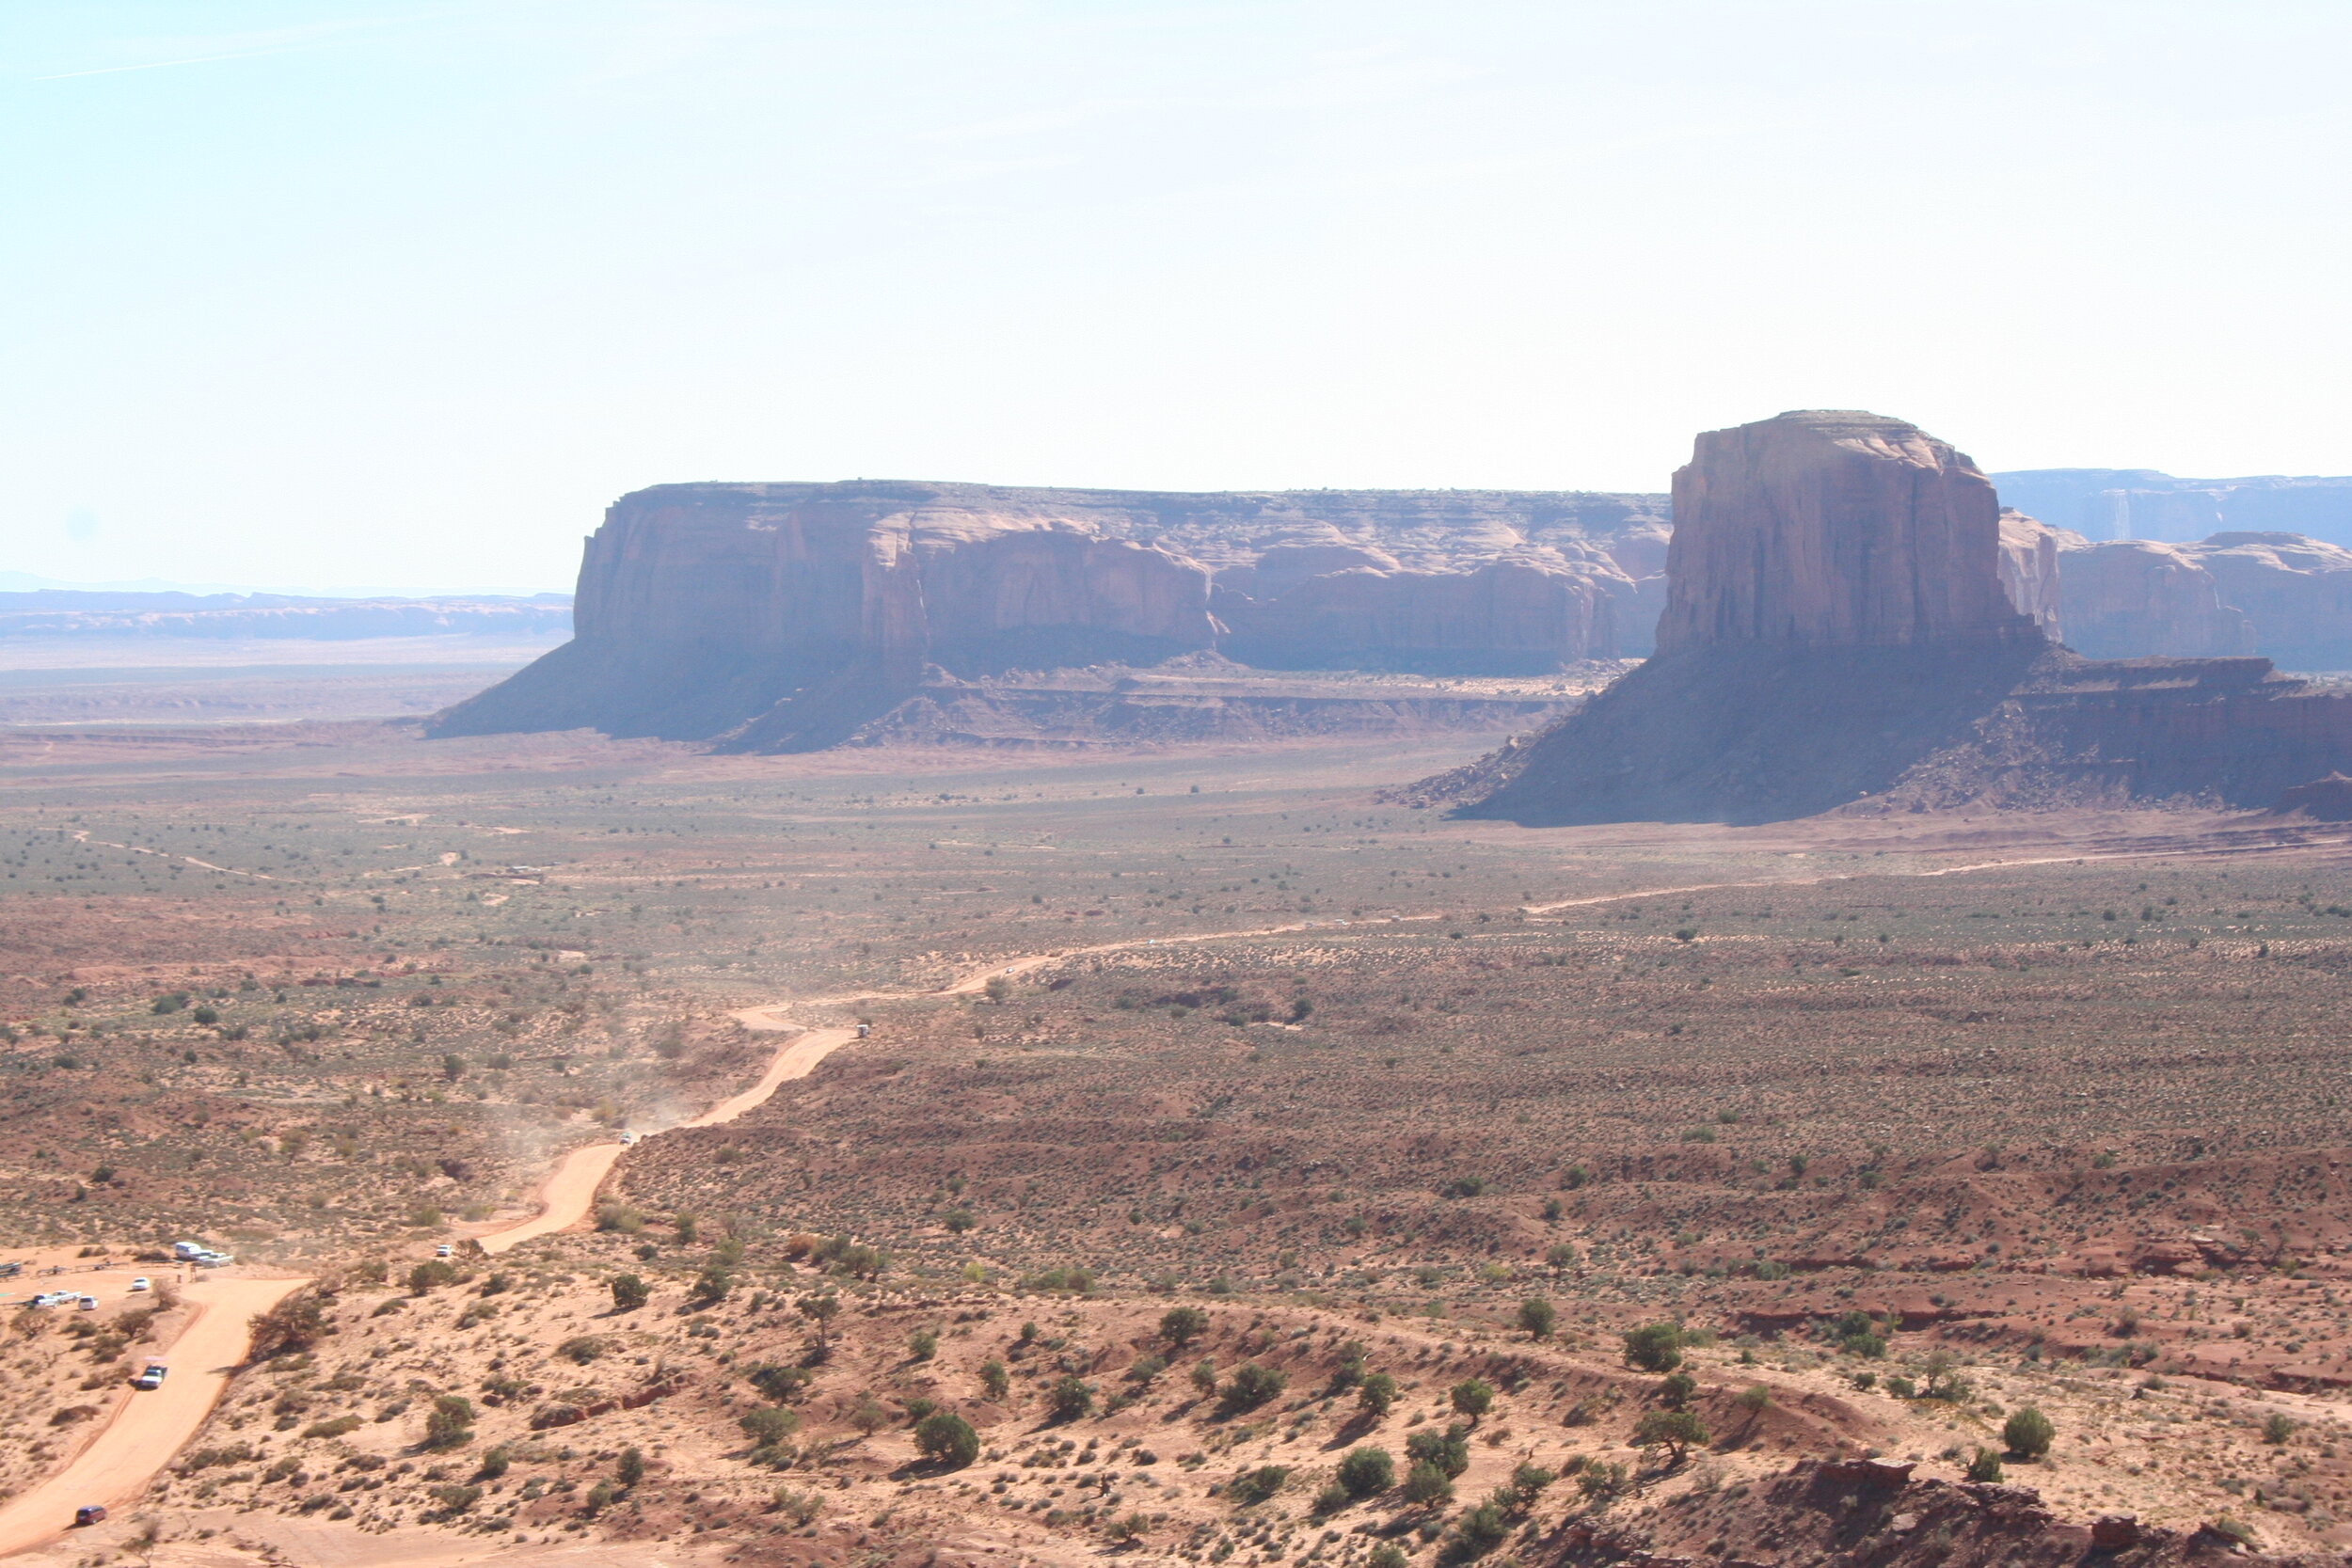   Looking east in Monument Valley.  